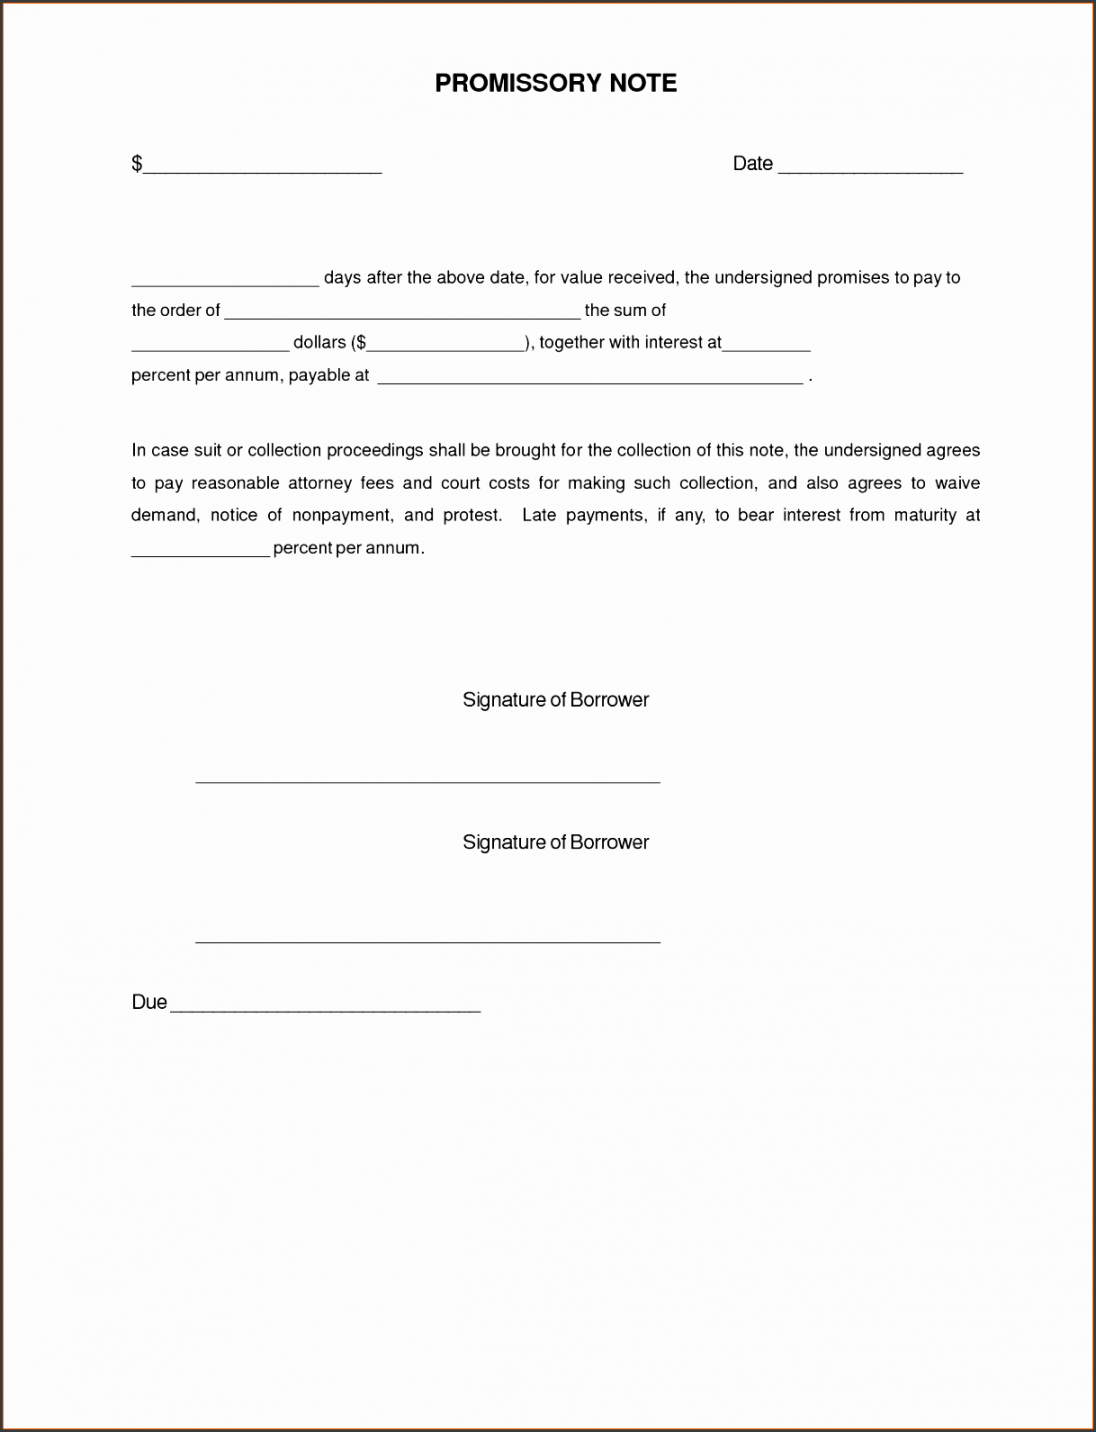 sample 8 promissory note template  sampletemplatess promissory note template minnesota pdf